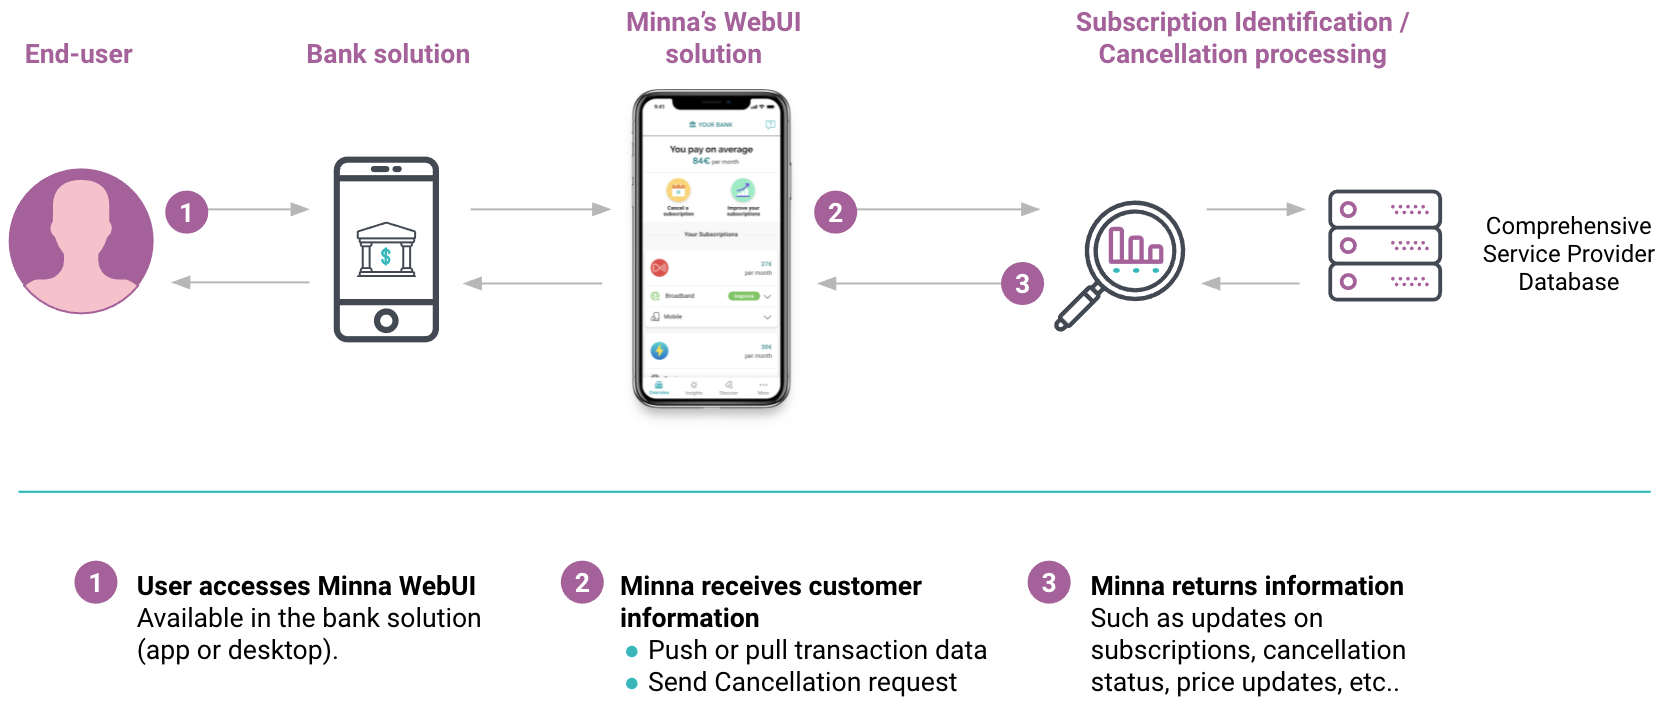 Overview of the WebUI solution